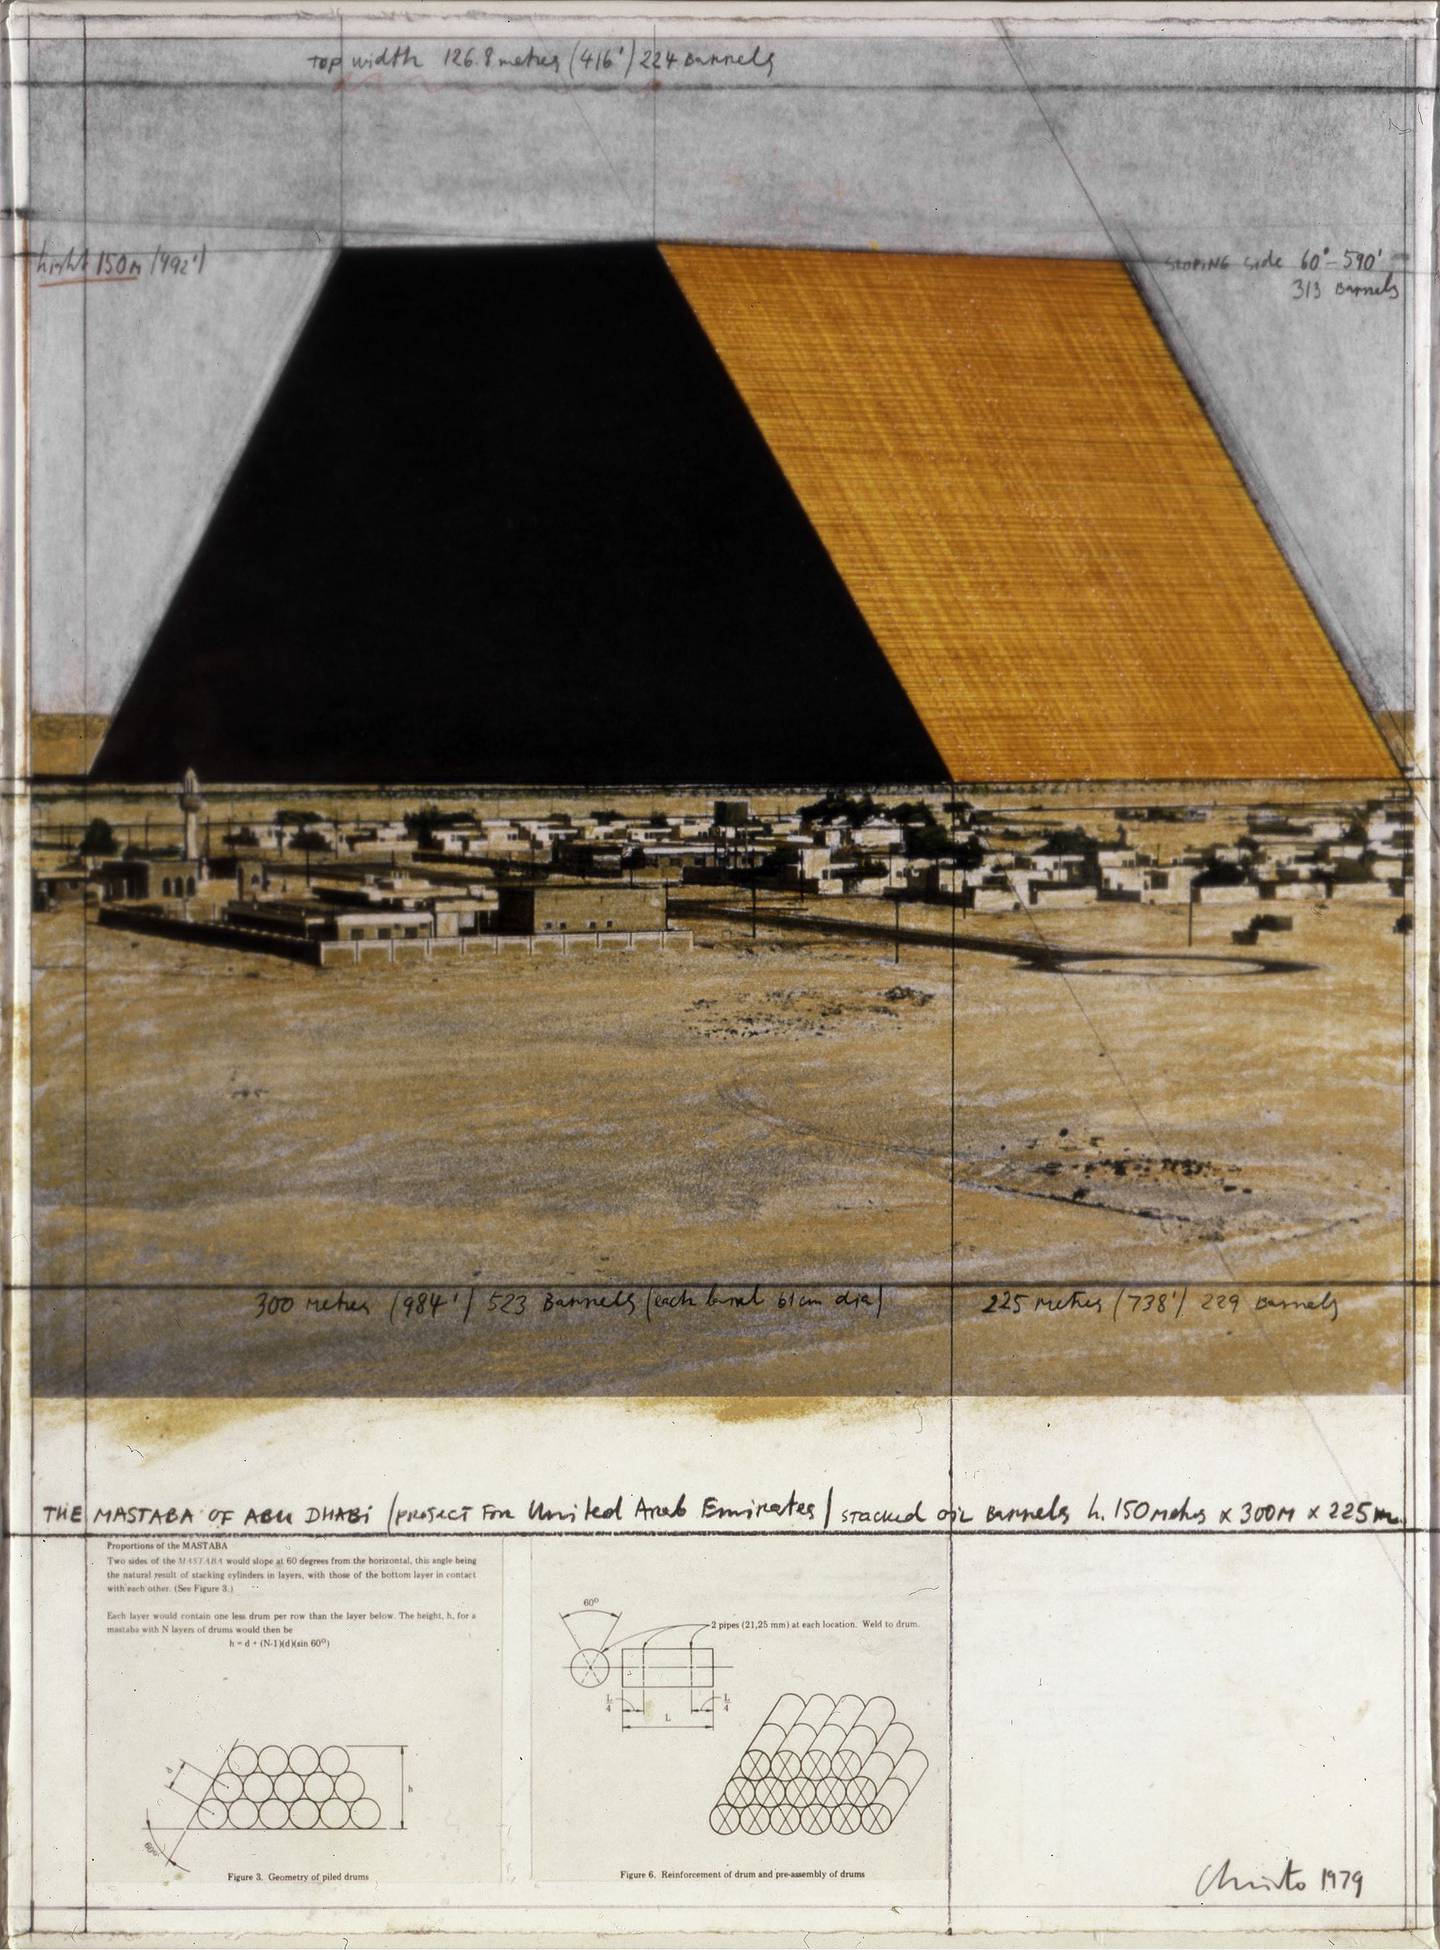 Preparatory sketches for the Abu Dhabi mastaba by Christo. Photo: Colnaghi Gallery